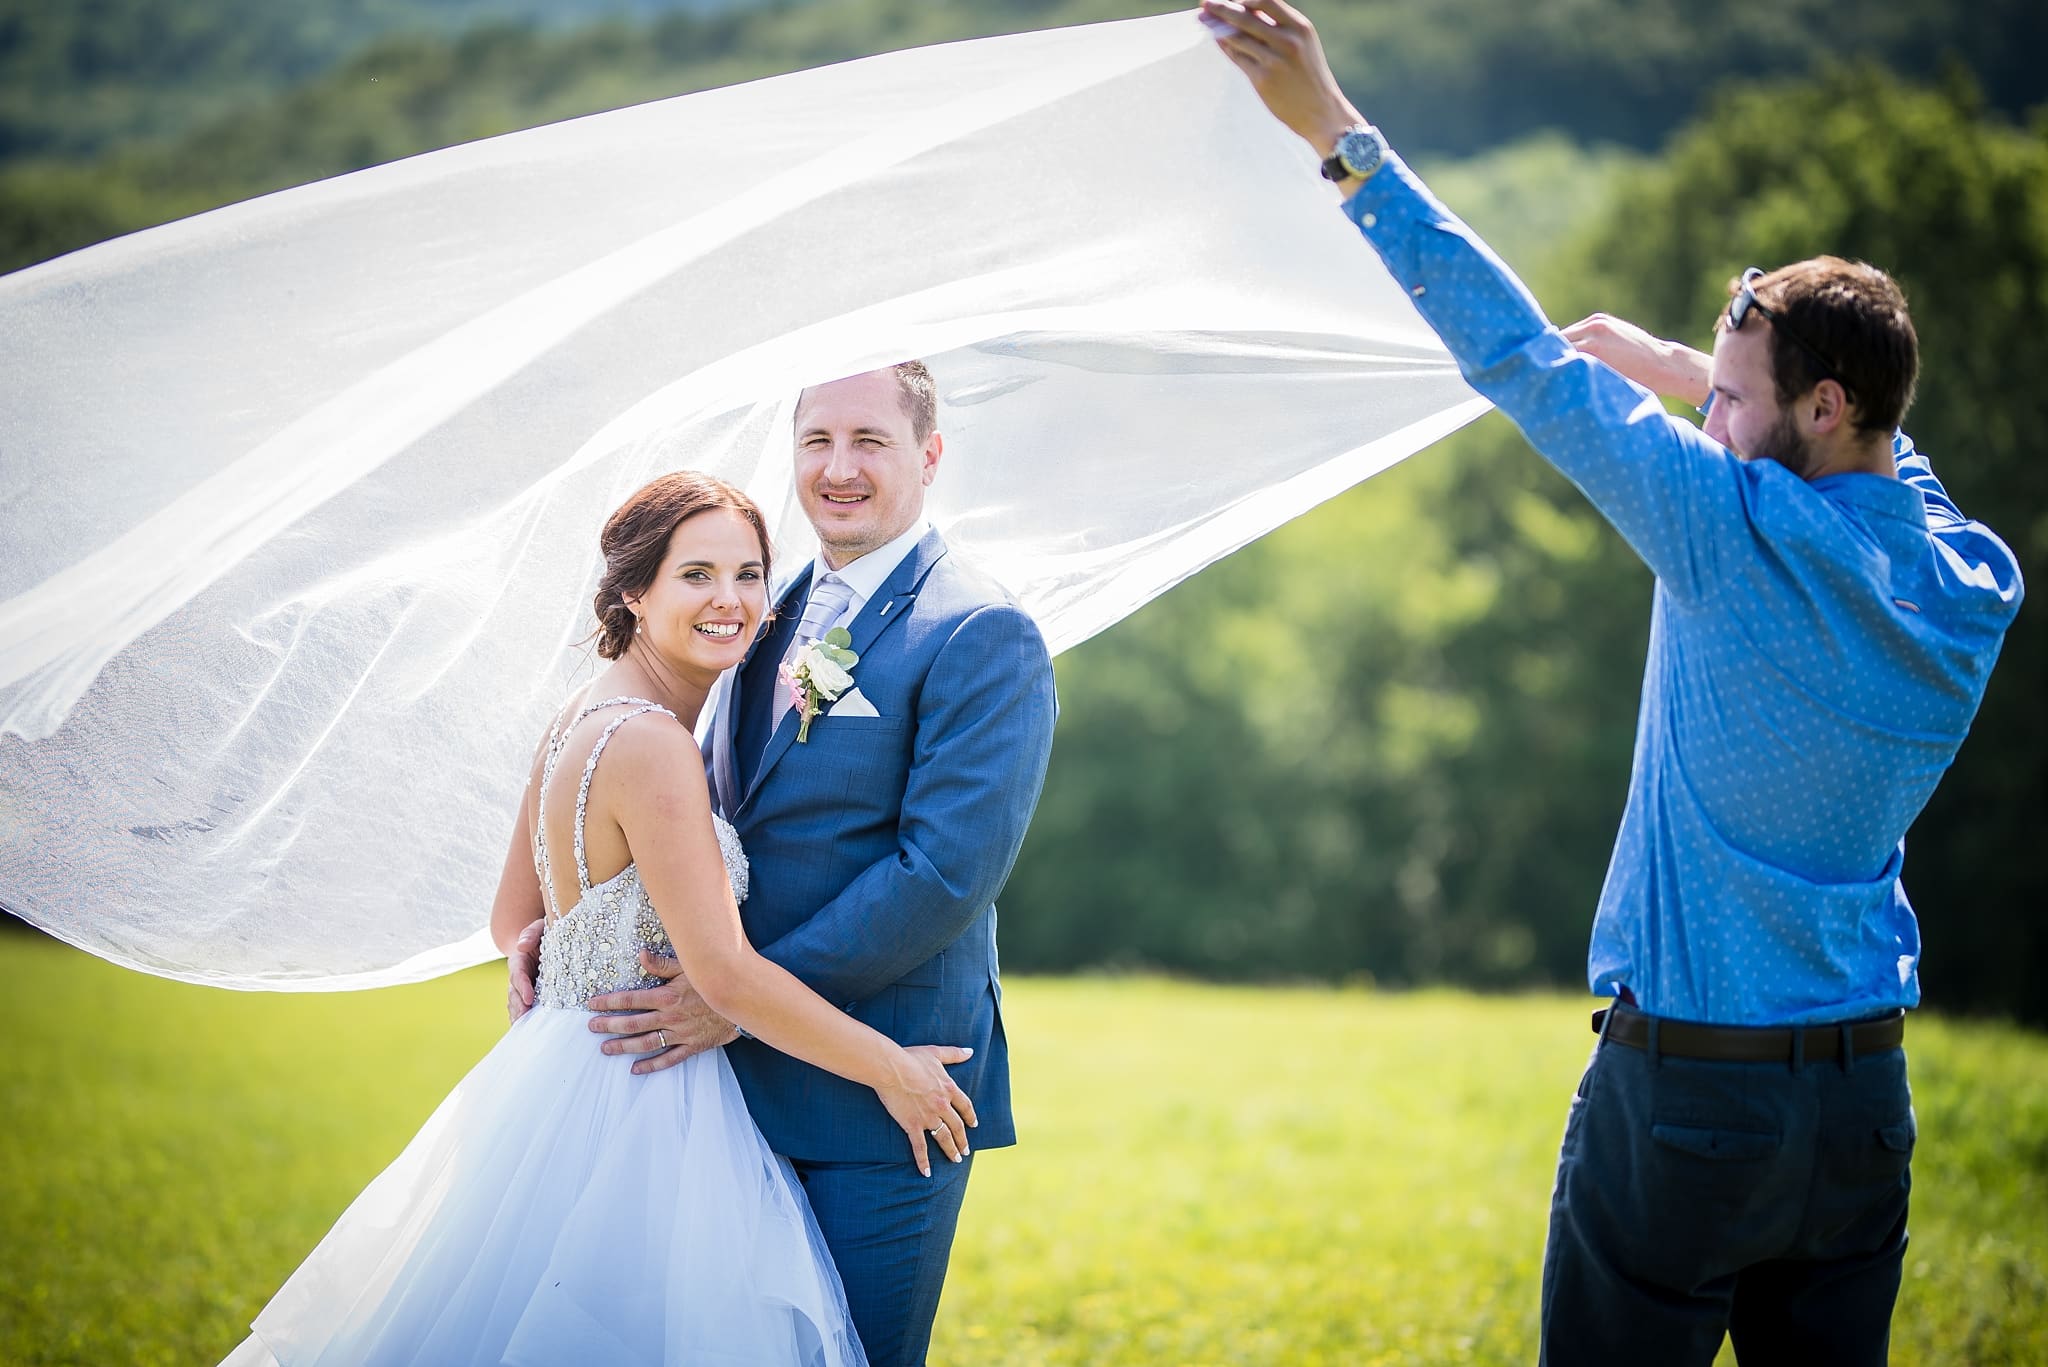 No More Faux Pas on the Big Day! 8 Basics of Wedding Photography Etiquette